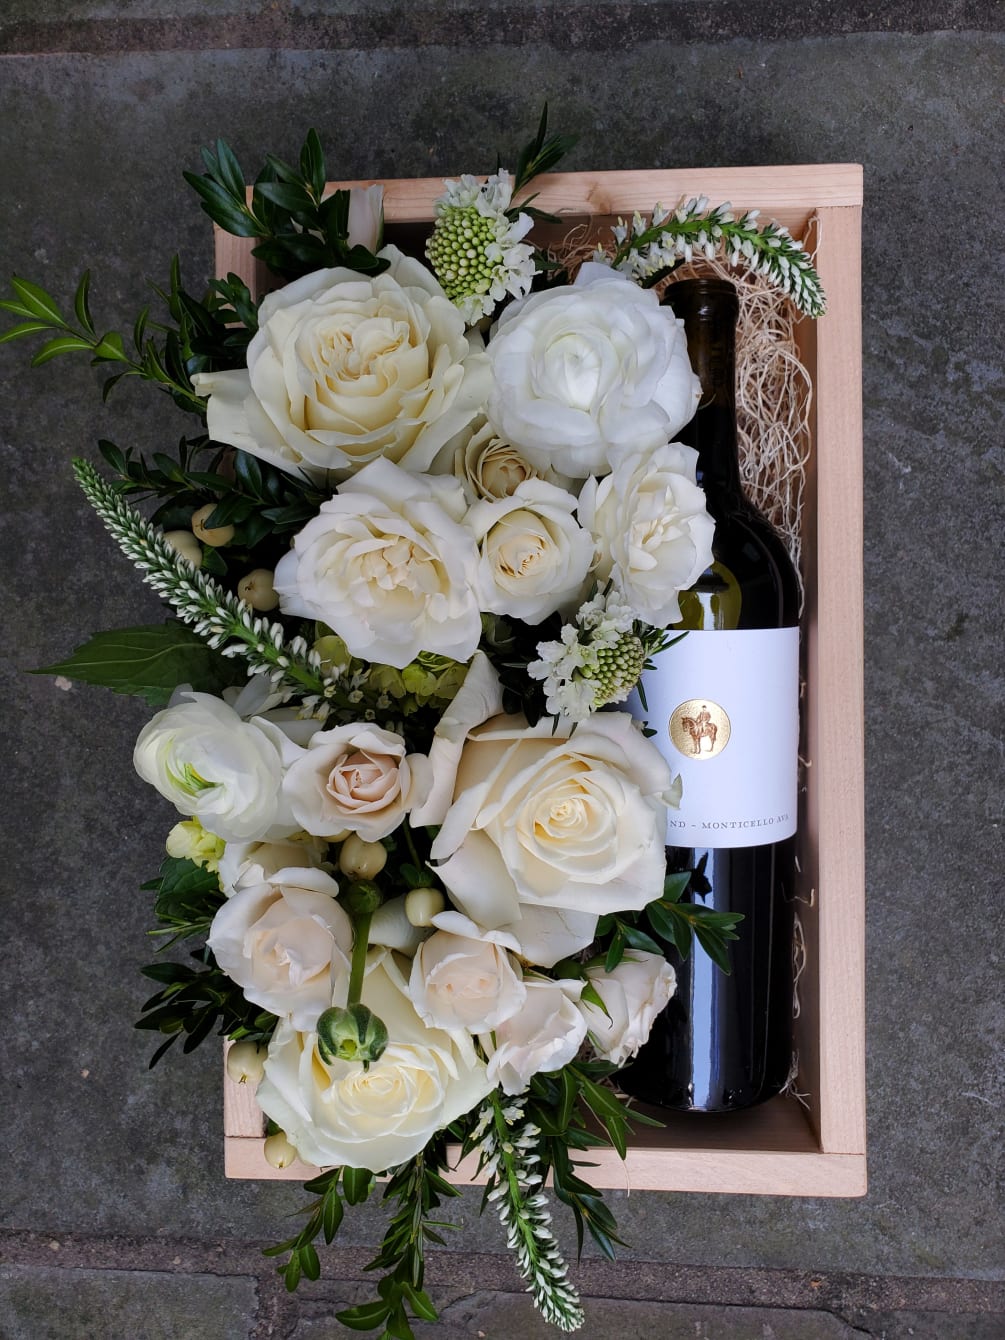 A beautiful wooden gift box, locally hand-crafted from reclaimed wood. A bottle